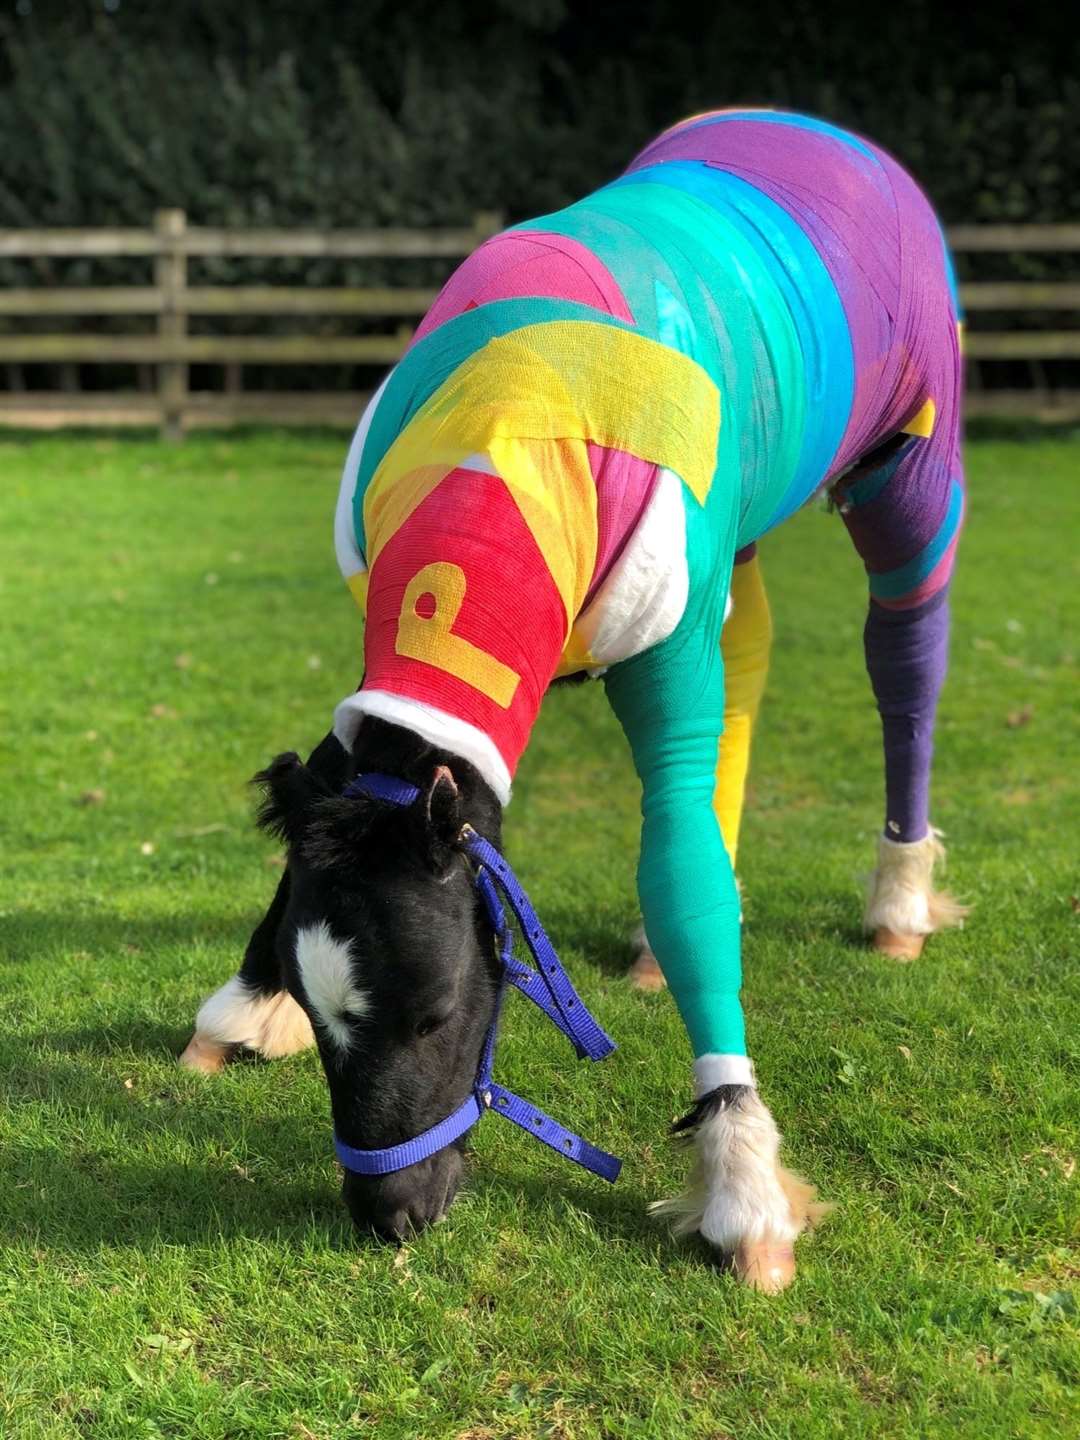 Phoenix the foal dressed in colourful bandages